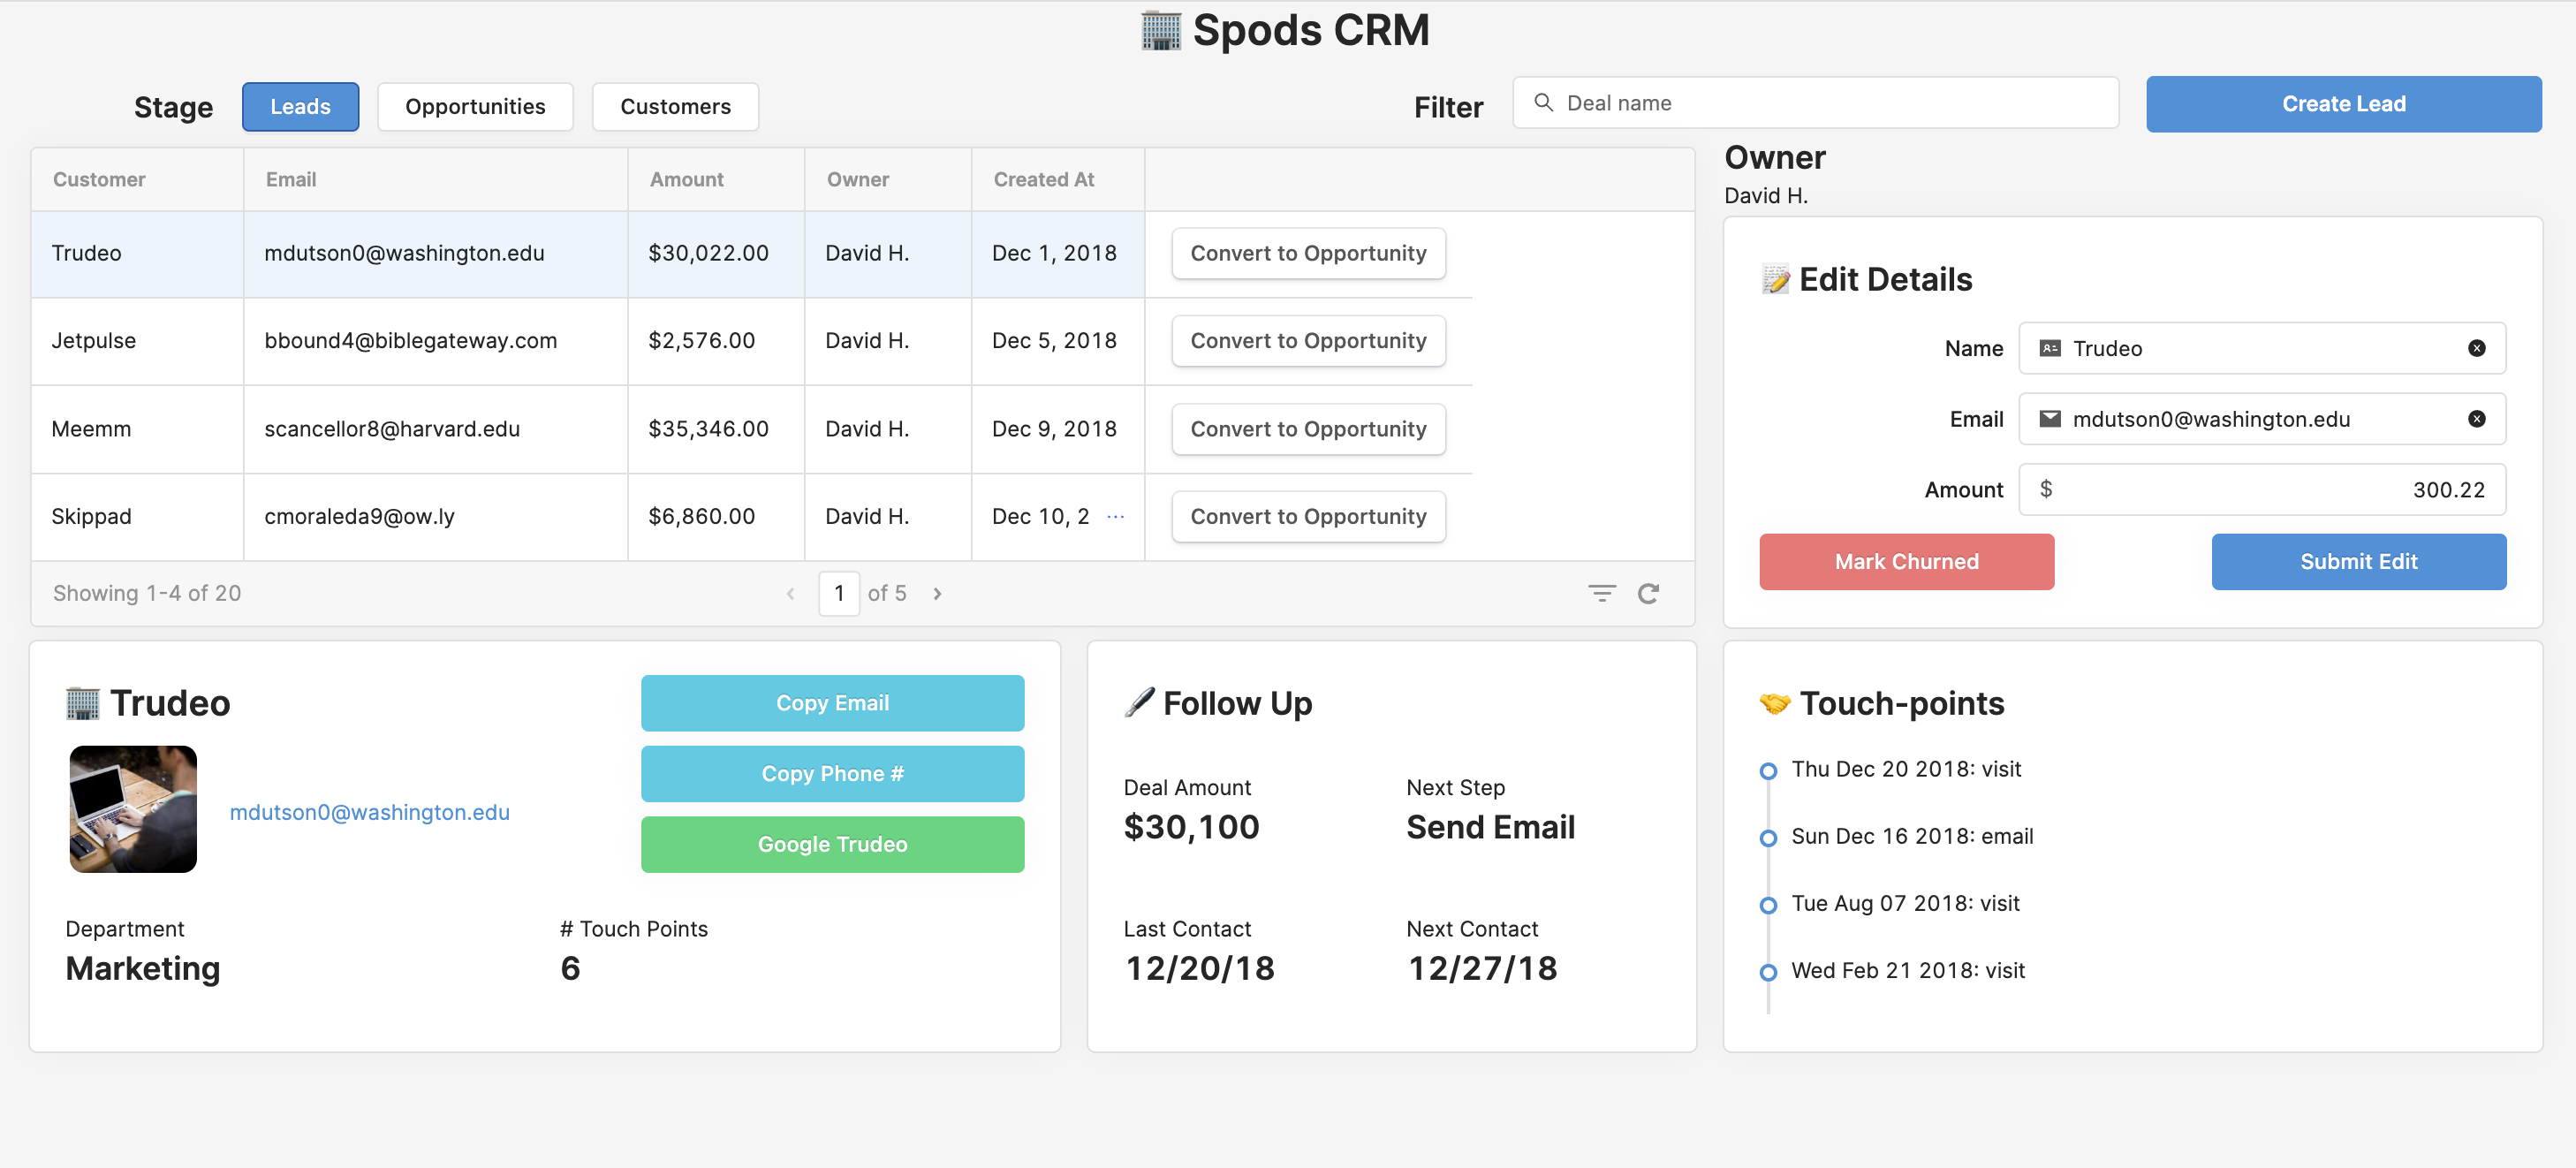 Spods CRM